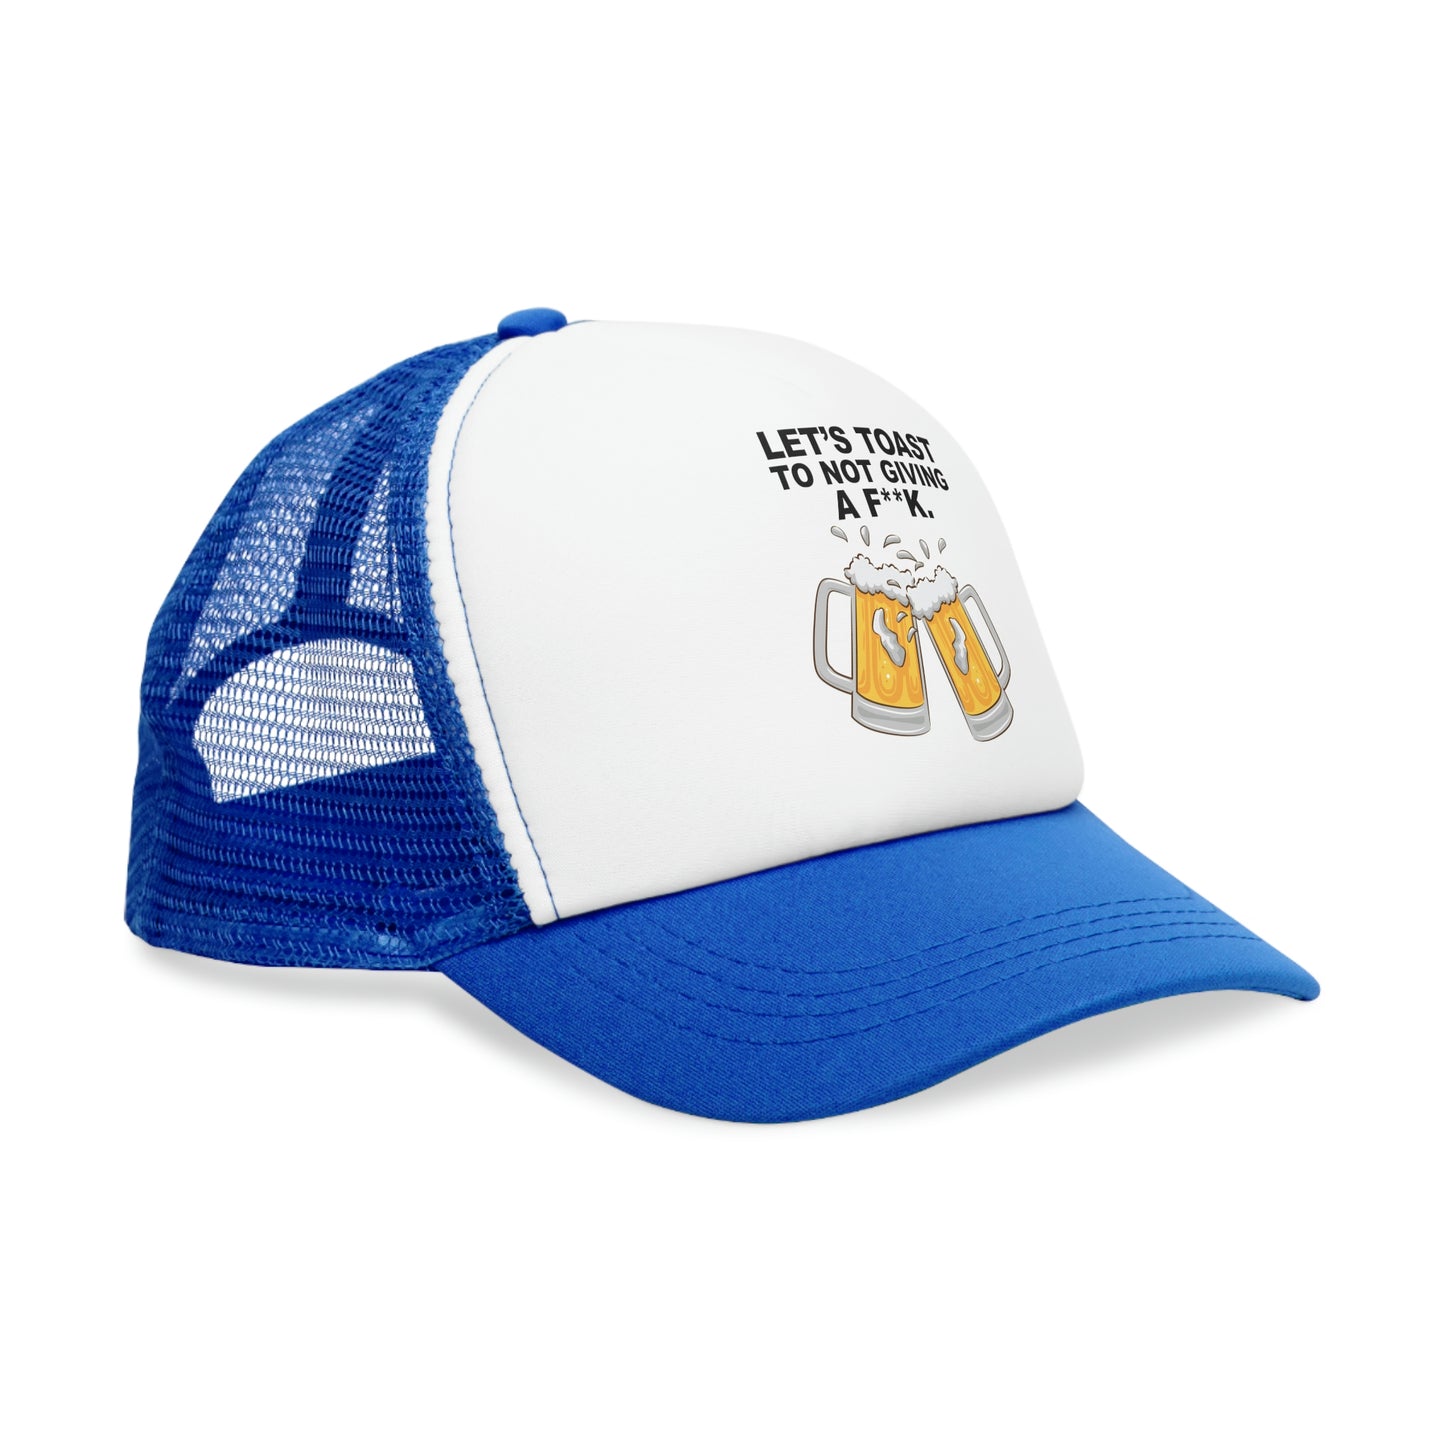 Let's Toast to Not Giving a F**K Beer–Mesh Cap